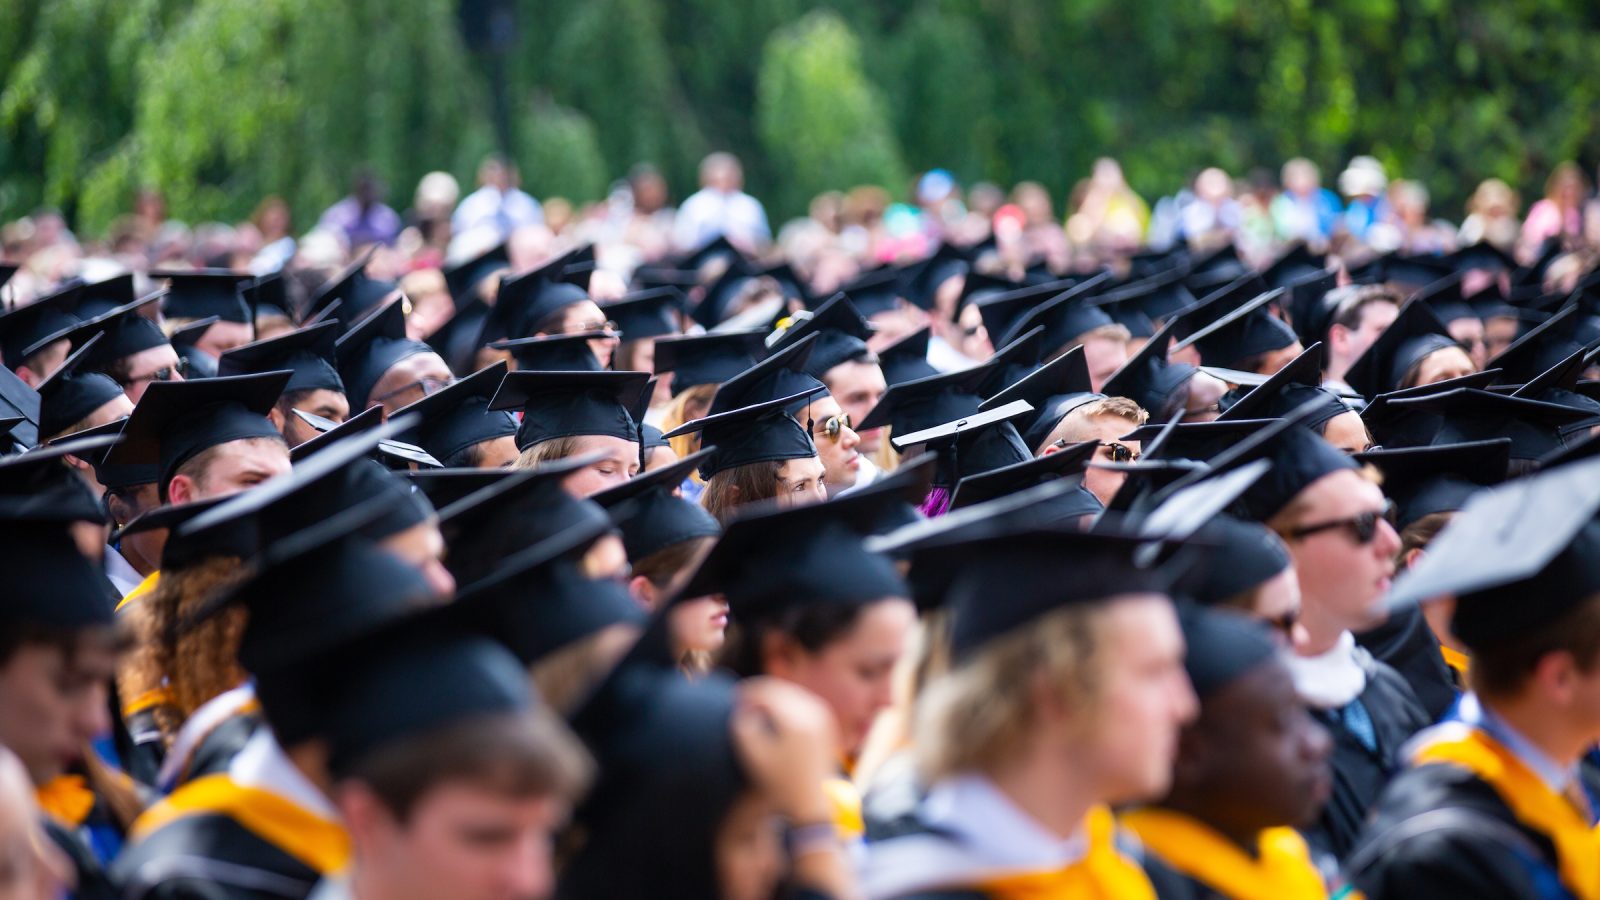 A crowd of students wearing graduation caps and gowns